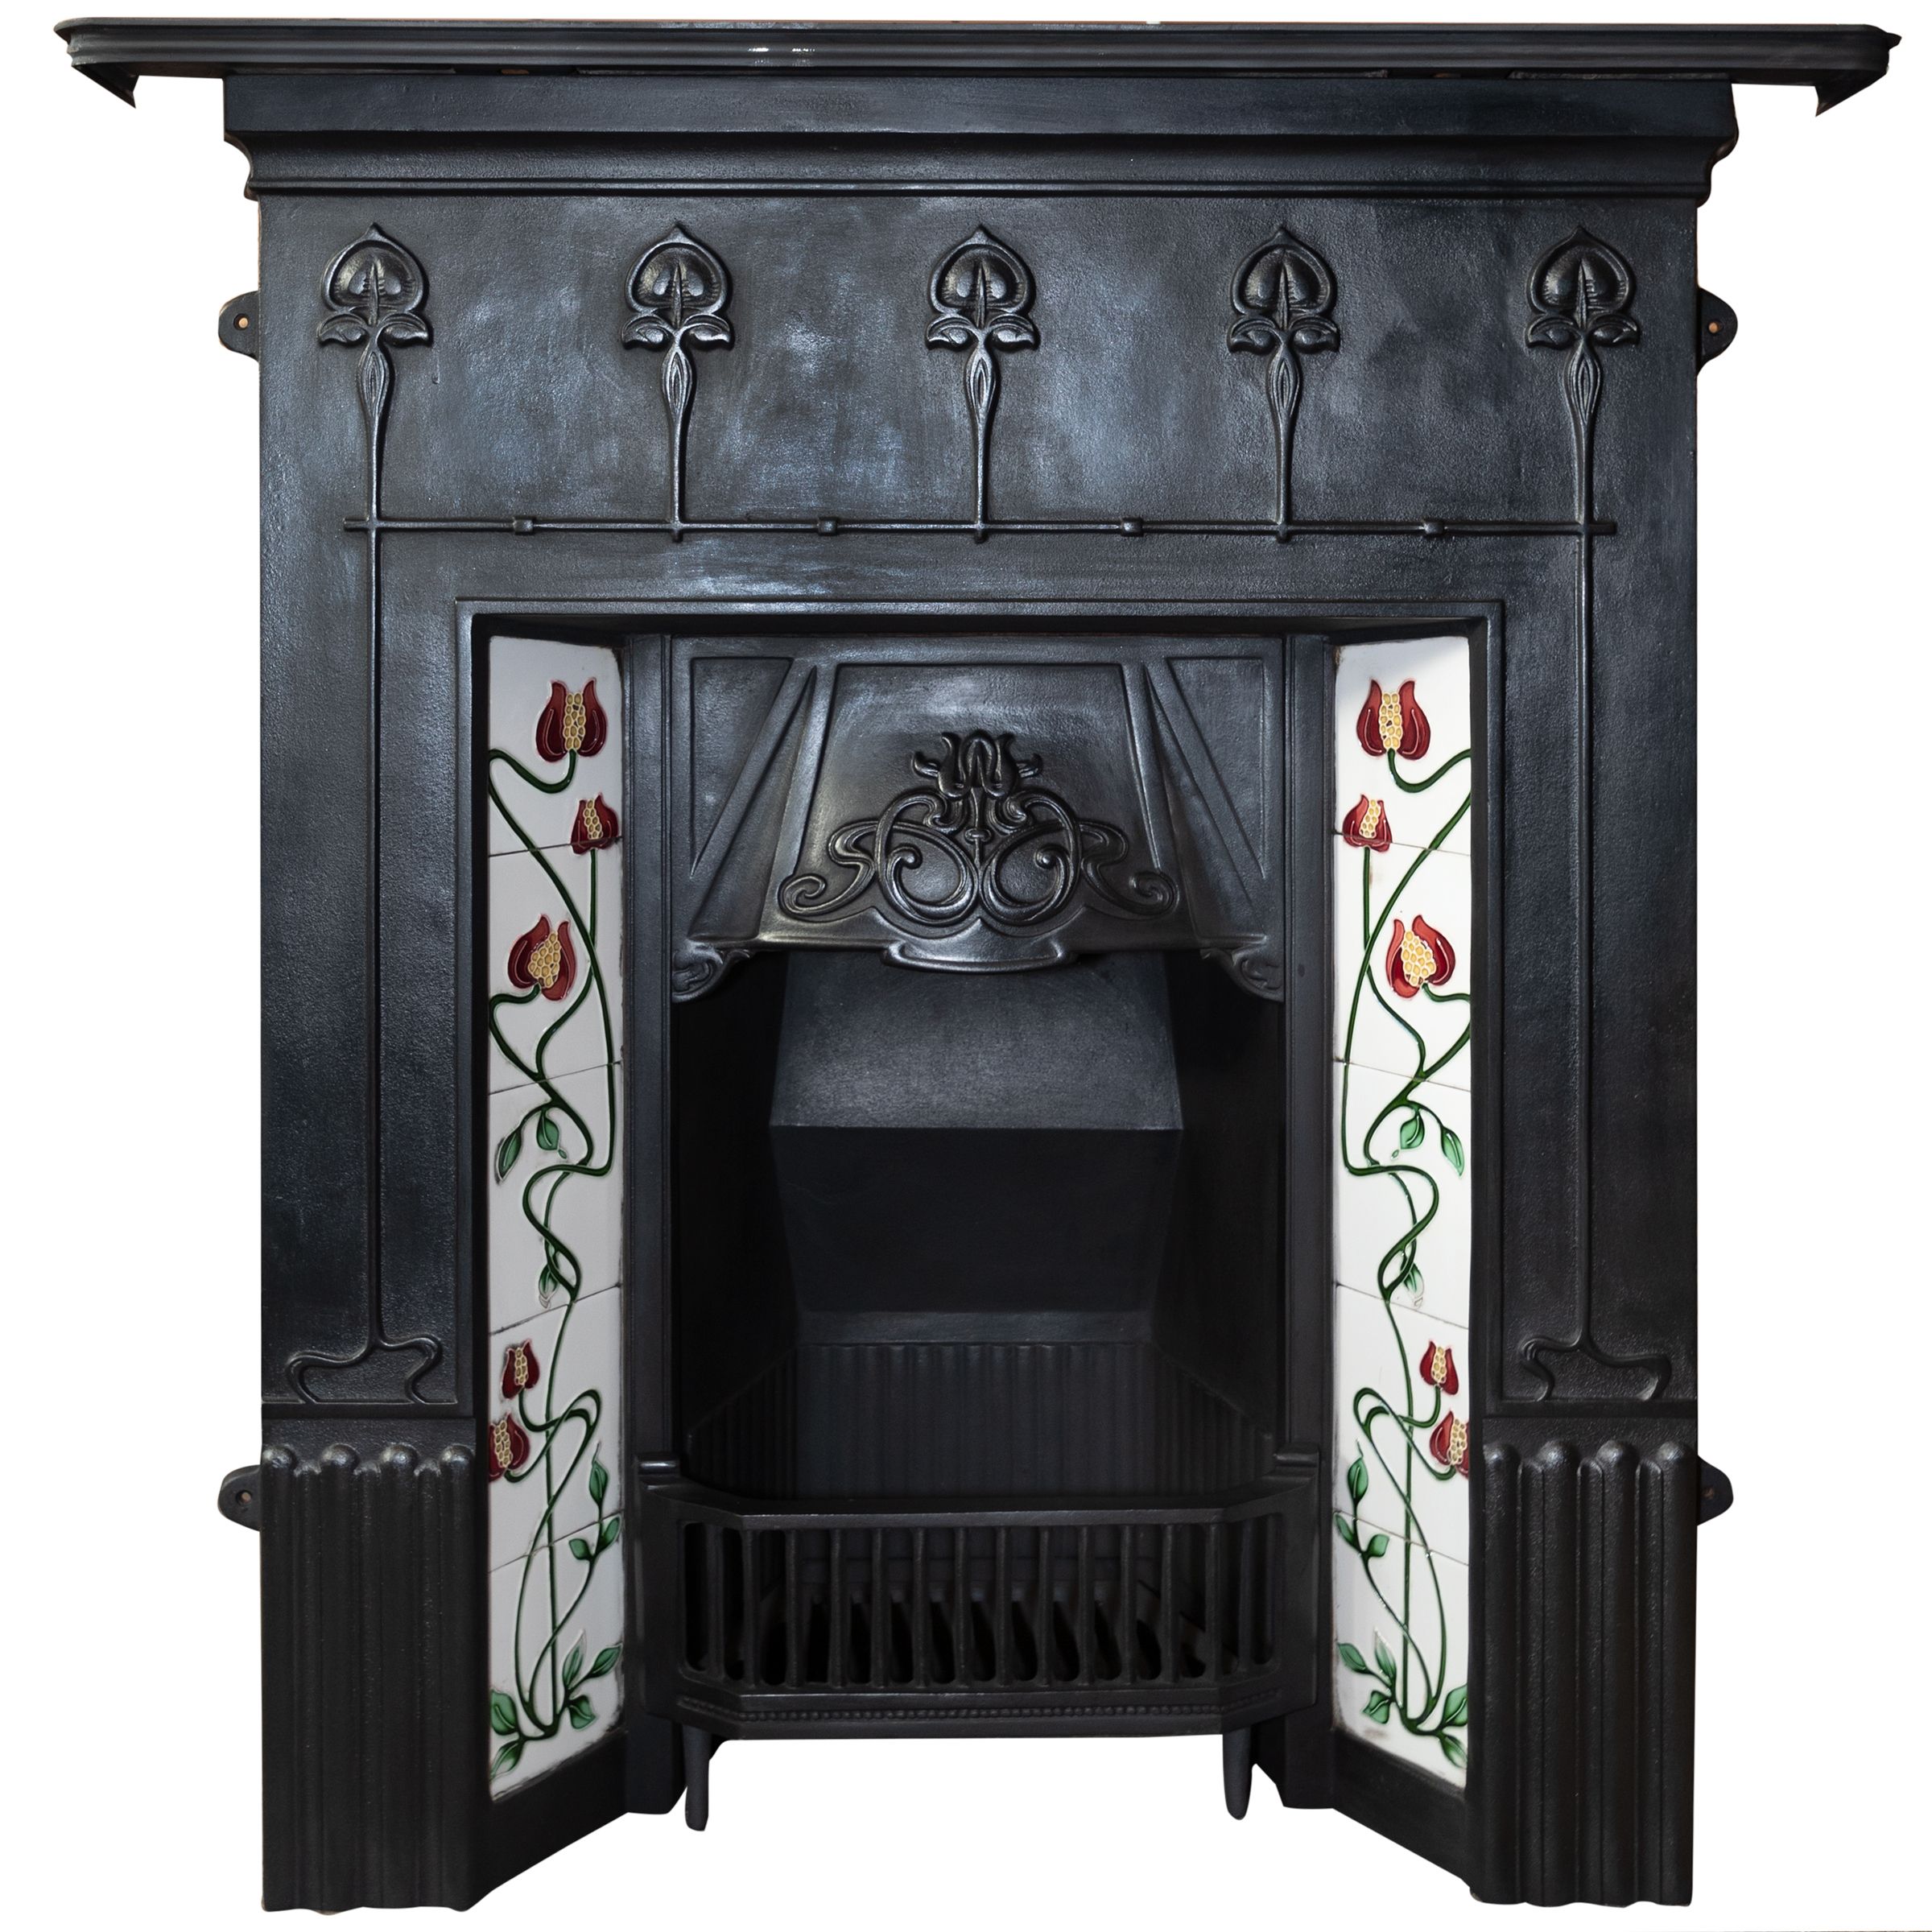 Restore Brick Fireplace Inspirational Huge Selection Of Antique Cast Iron Fireplaces Fully